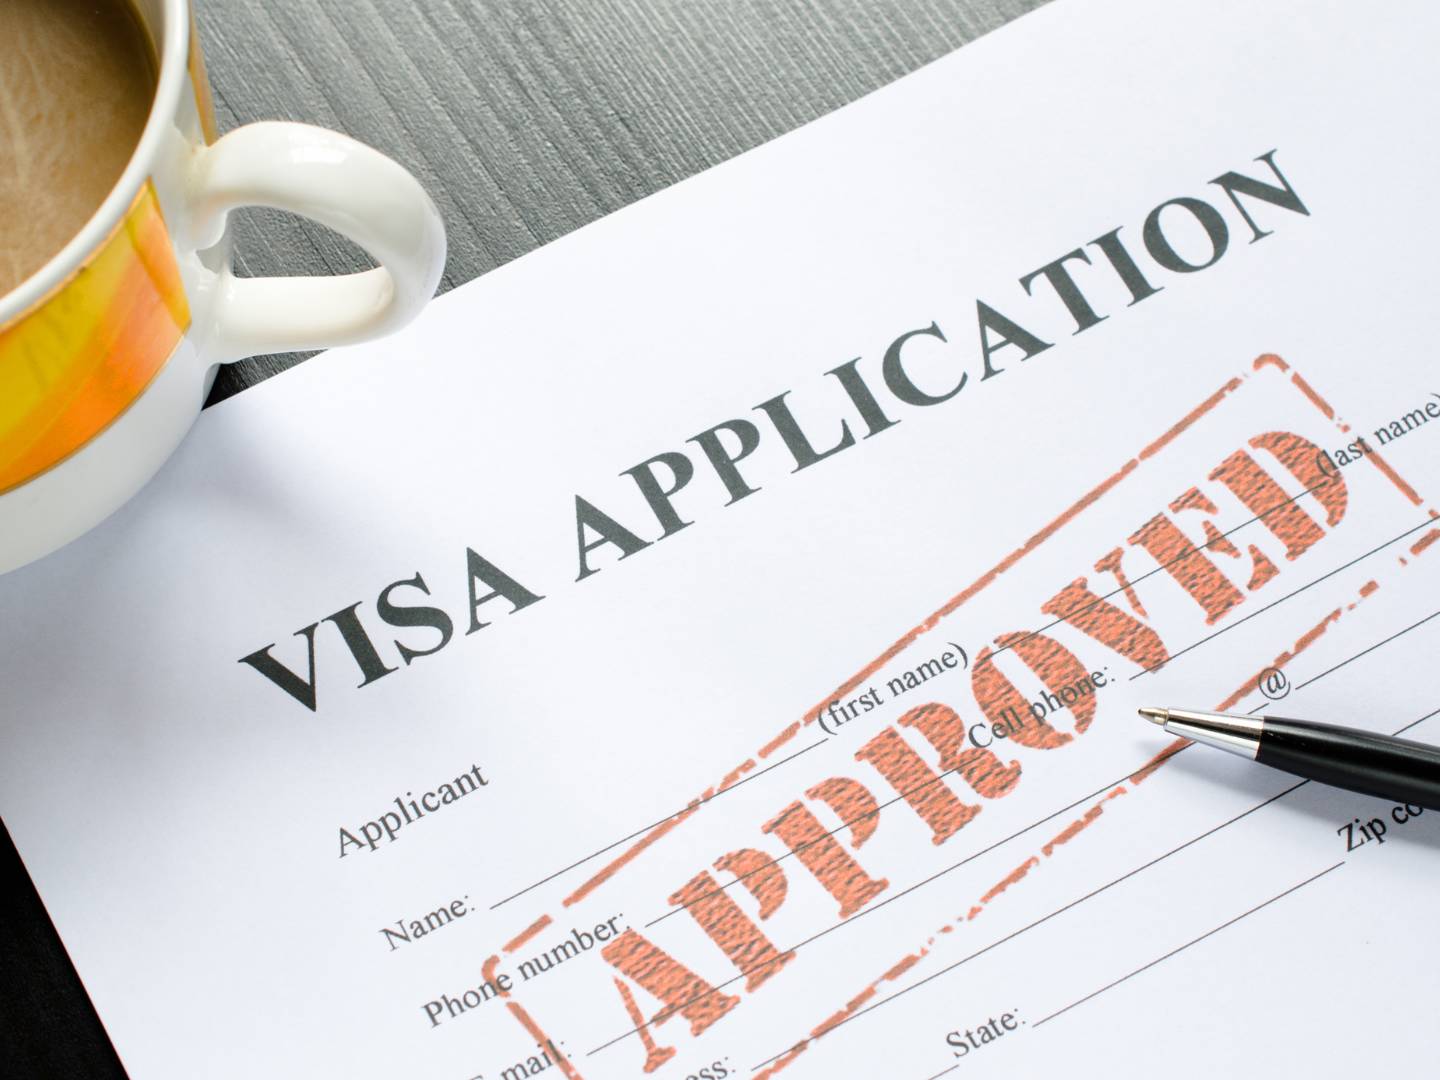 France Work Visa: Application Process and Requirements